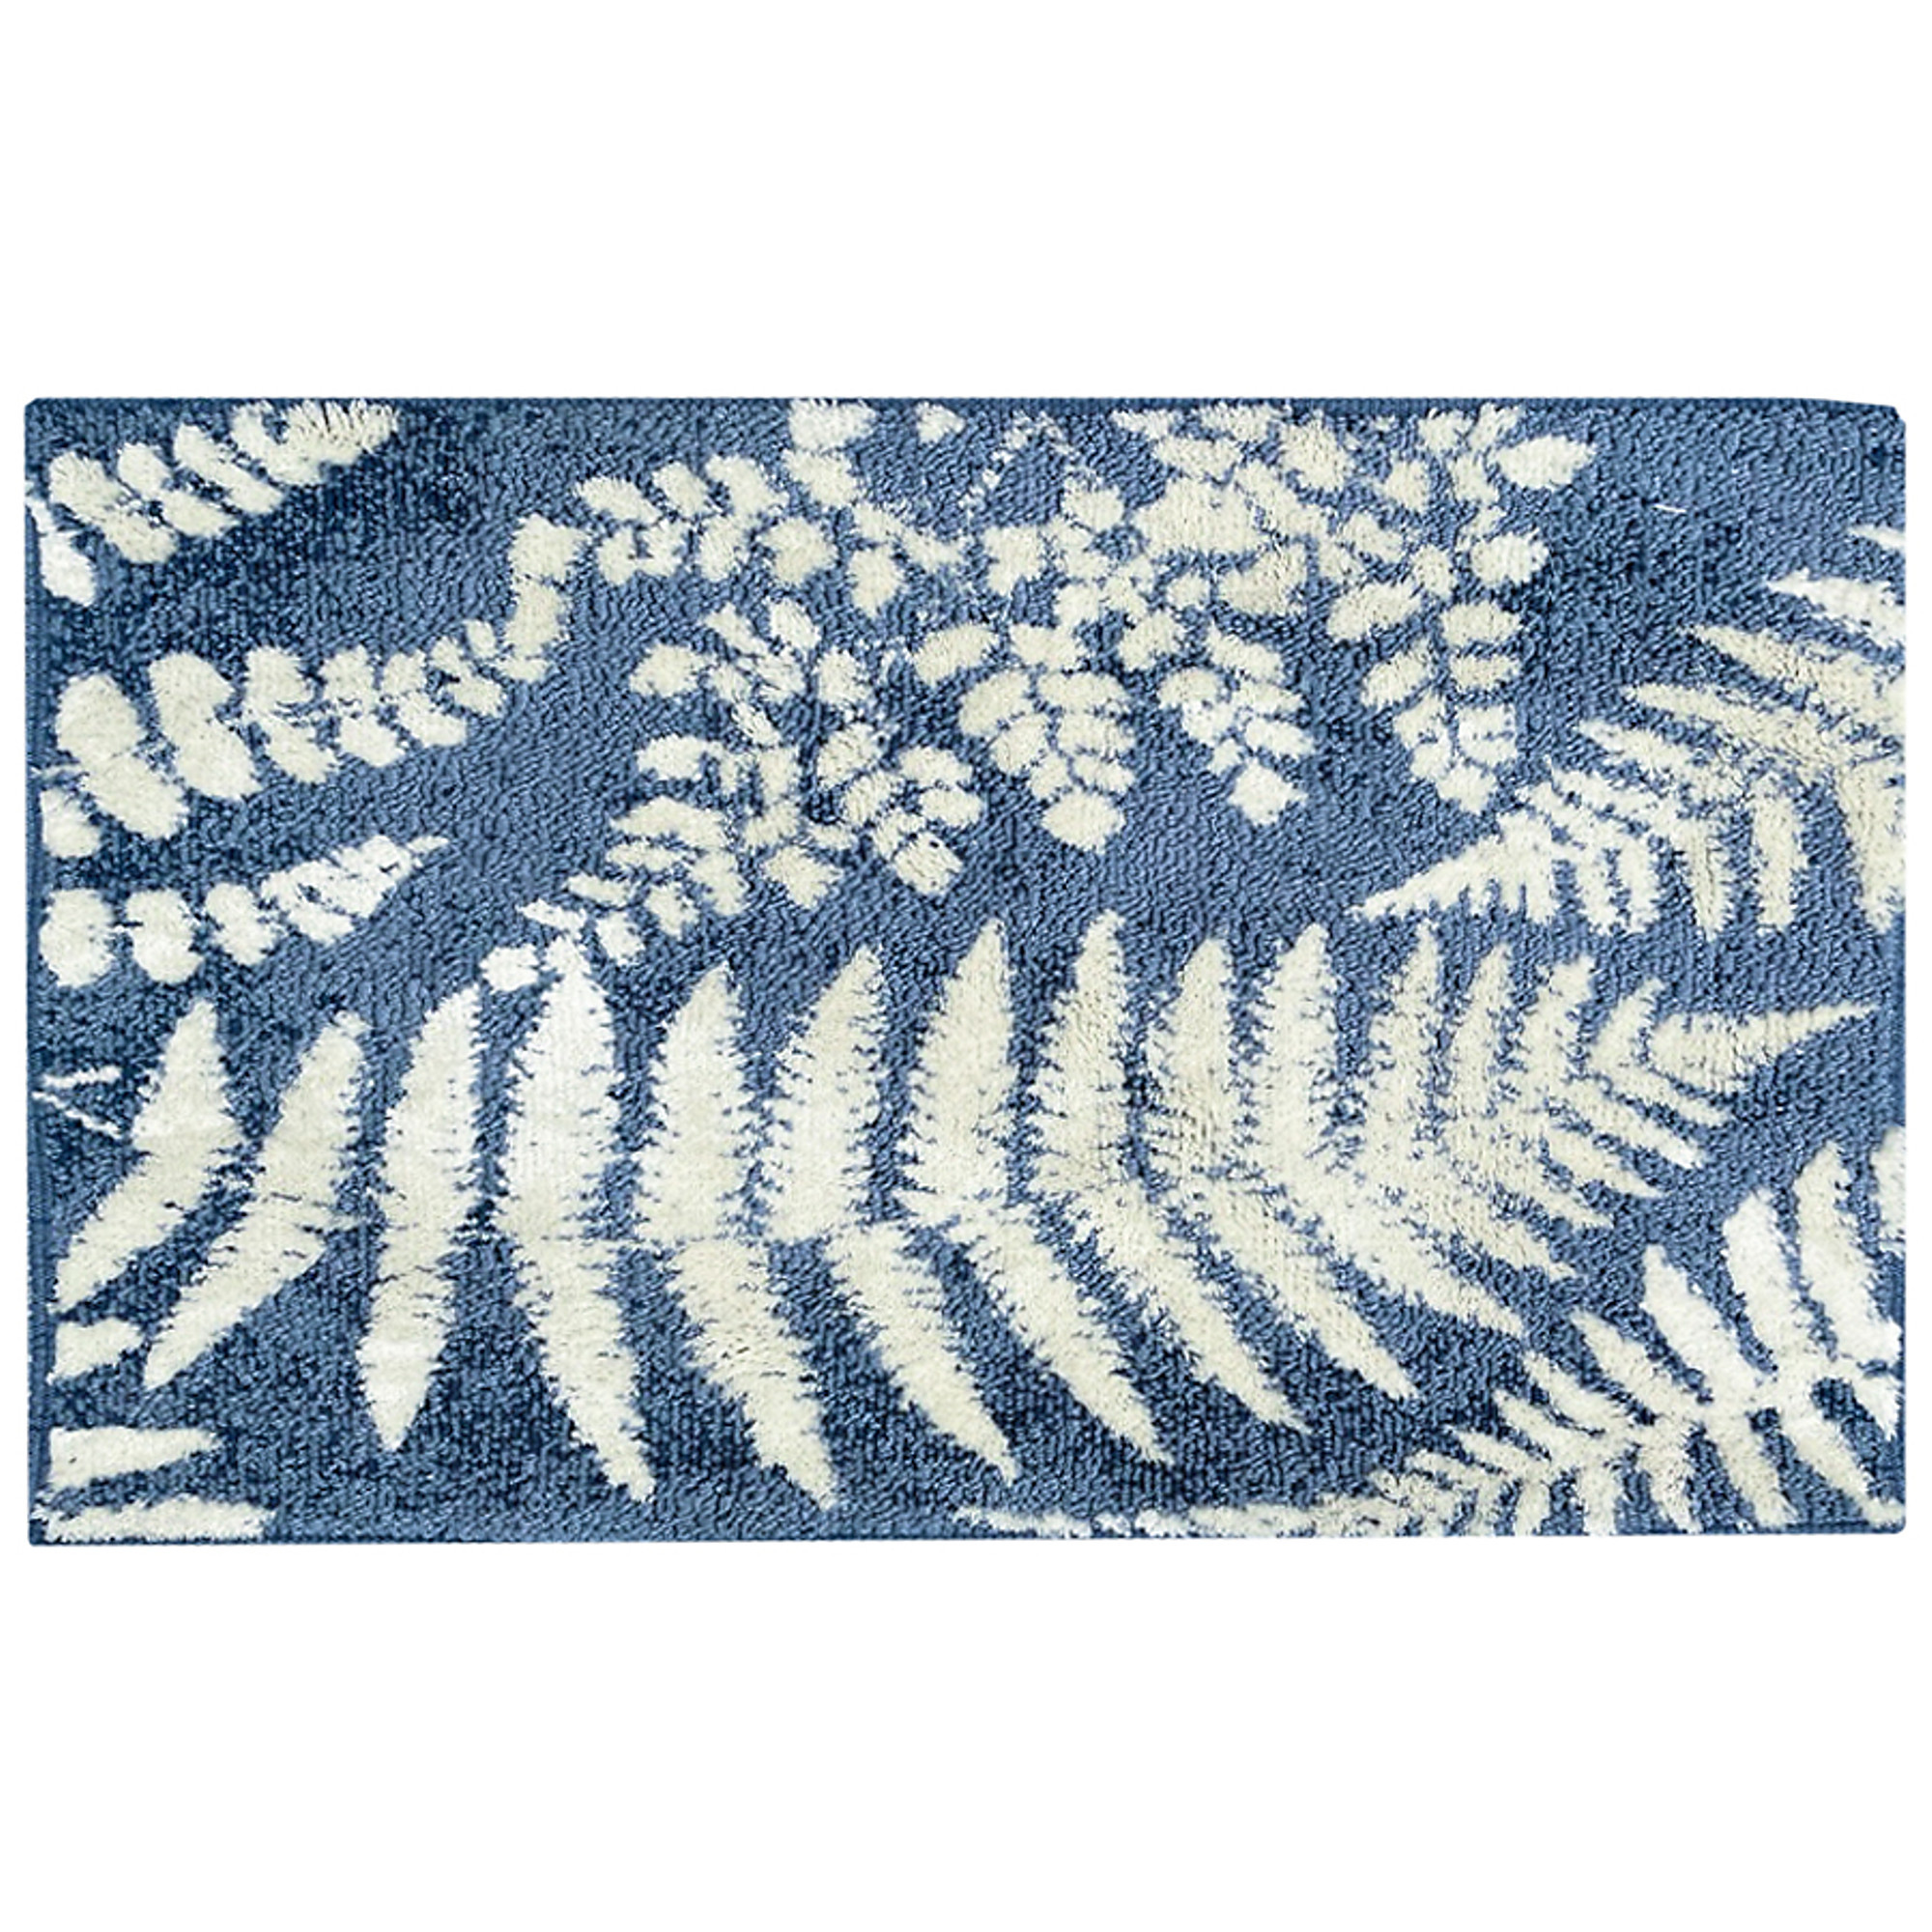 Wandering Ferns Simple Spaces Foliage Accent Rug with Leaves / Runner Rug